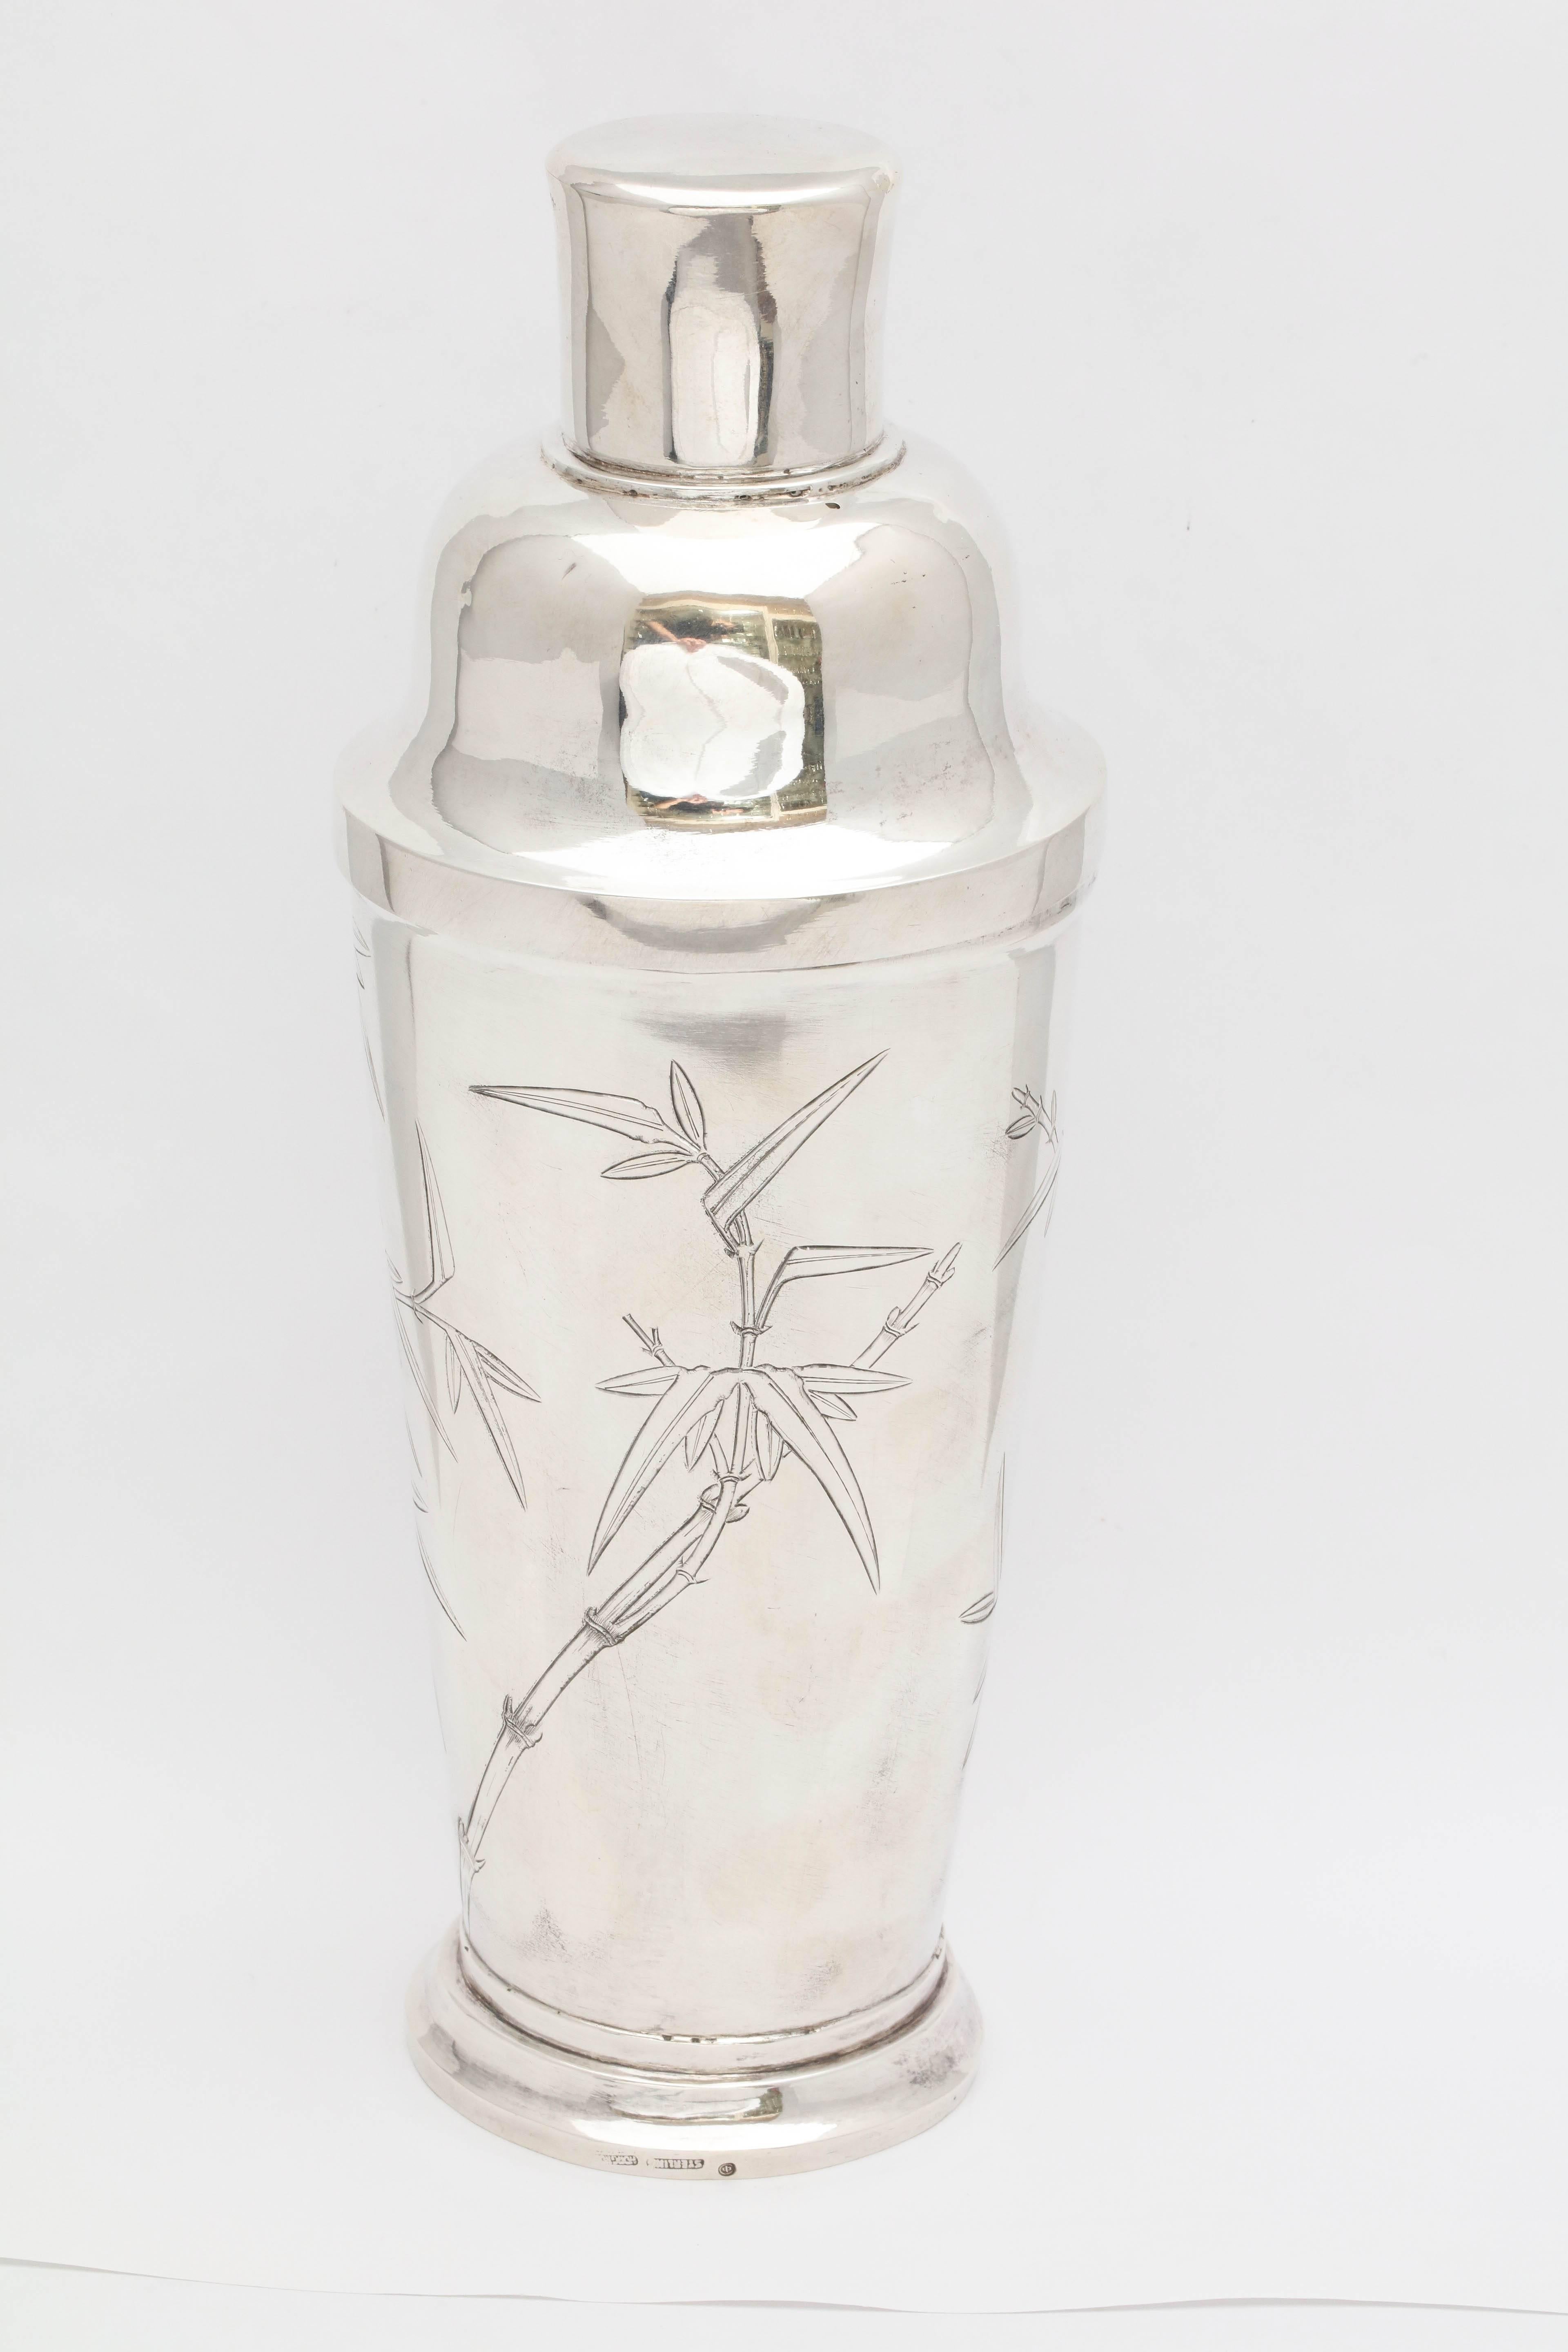 Japanese Mid-Century Modern Sterling Silver Cocktail Shaker